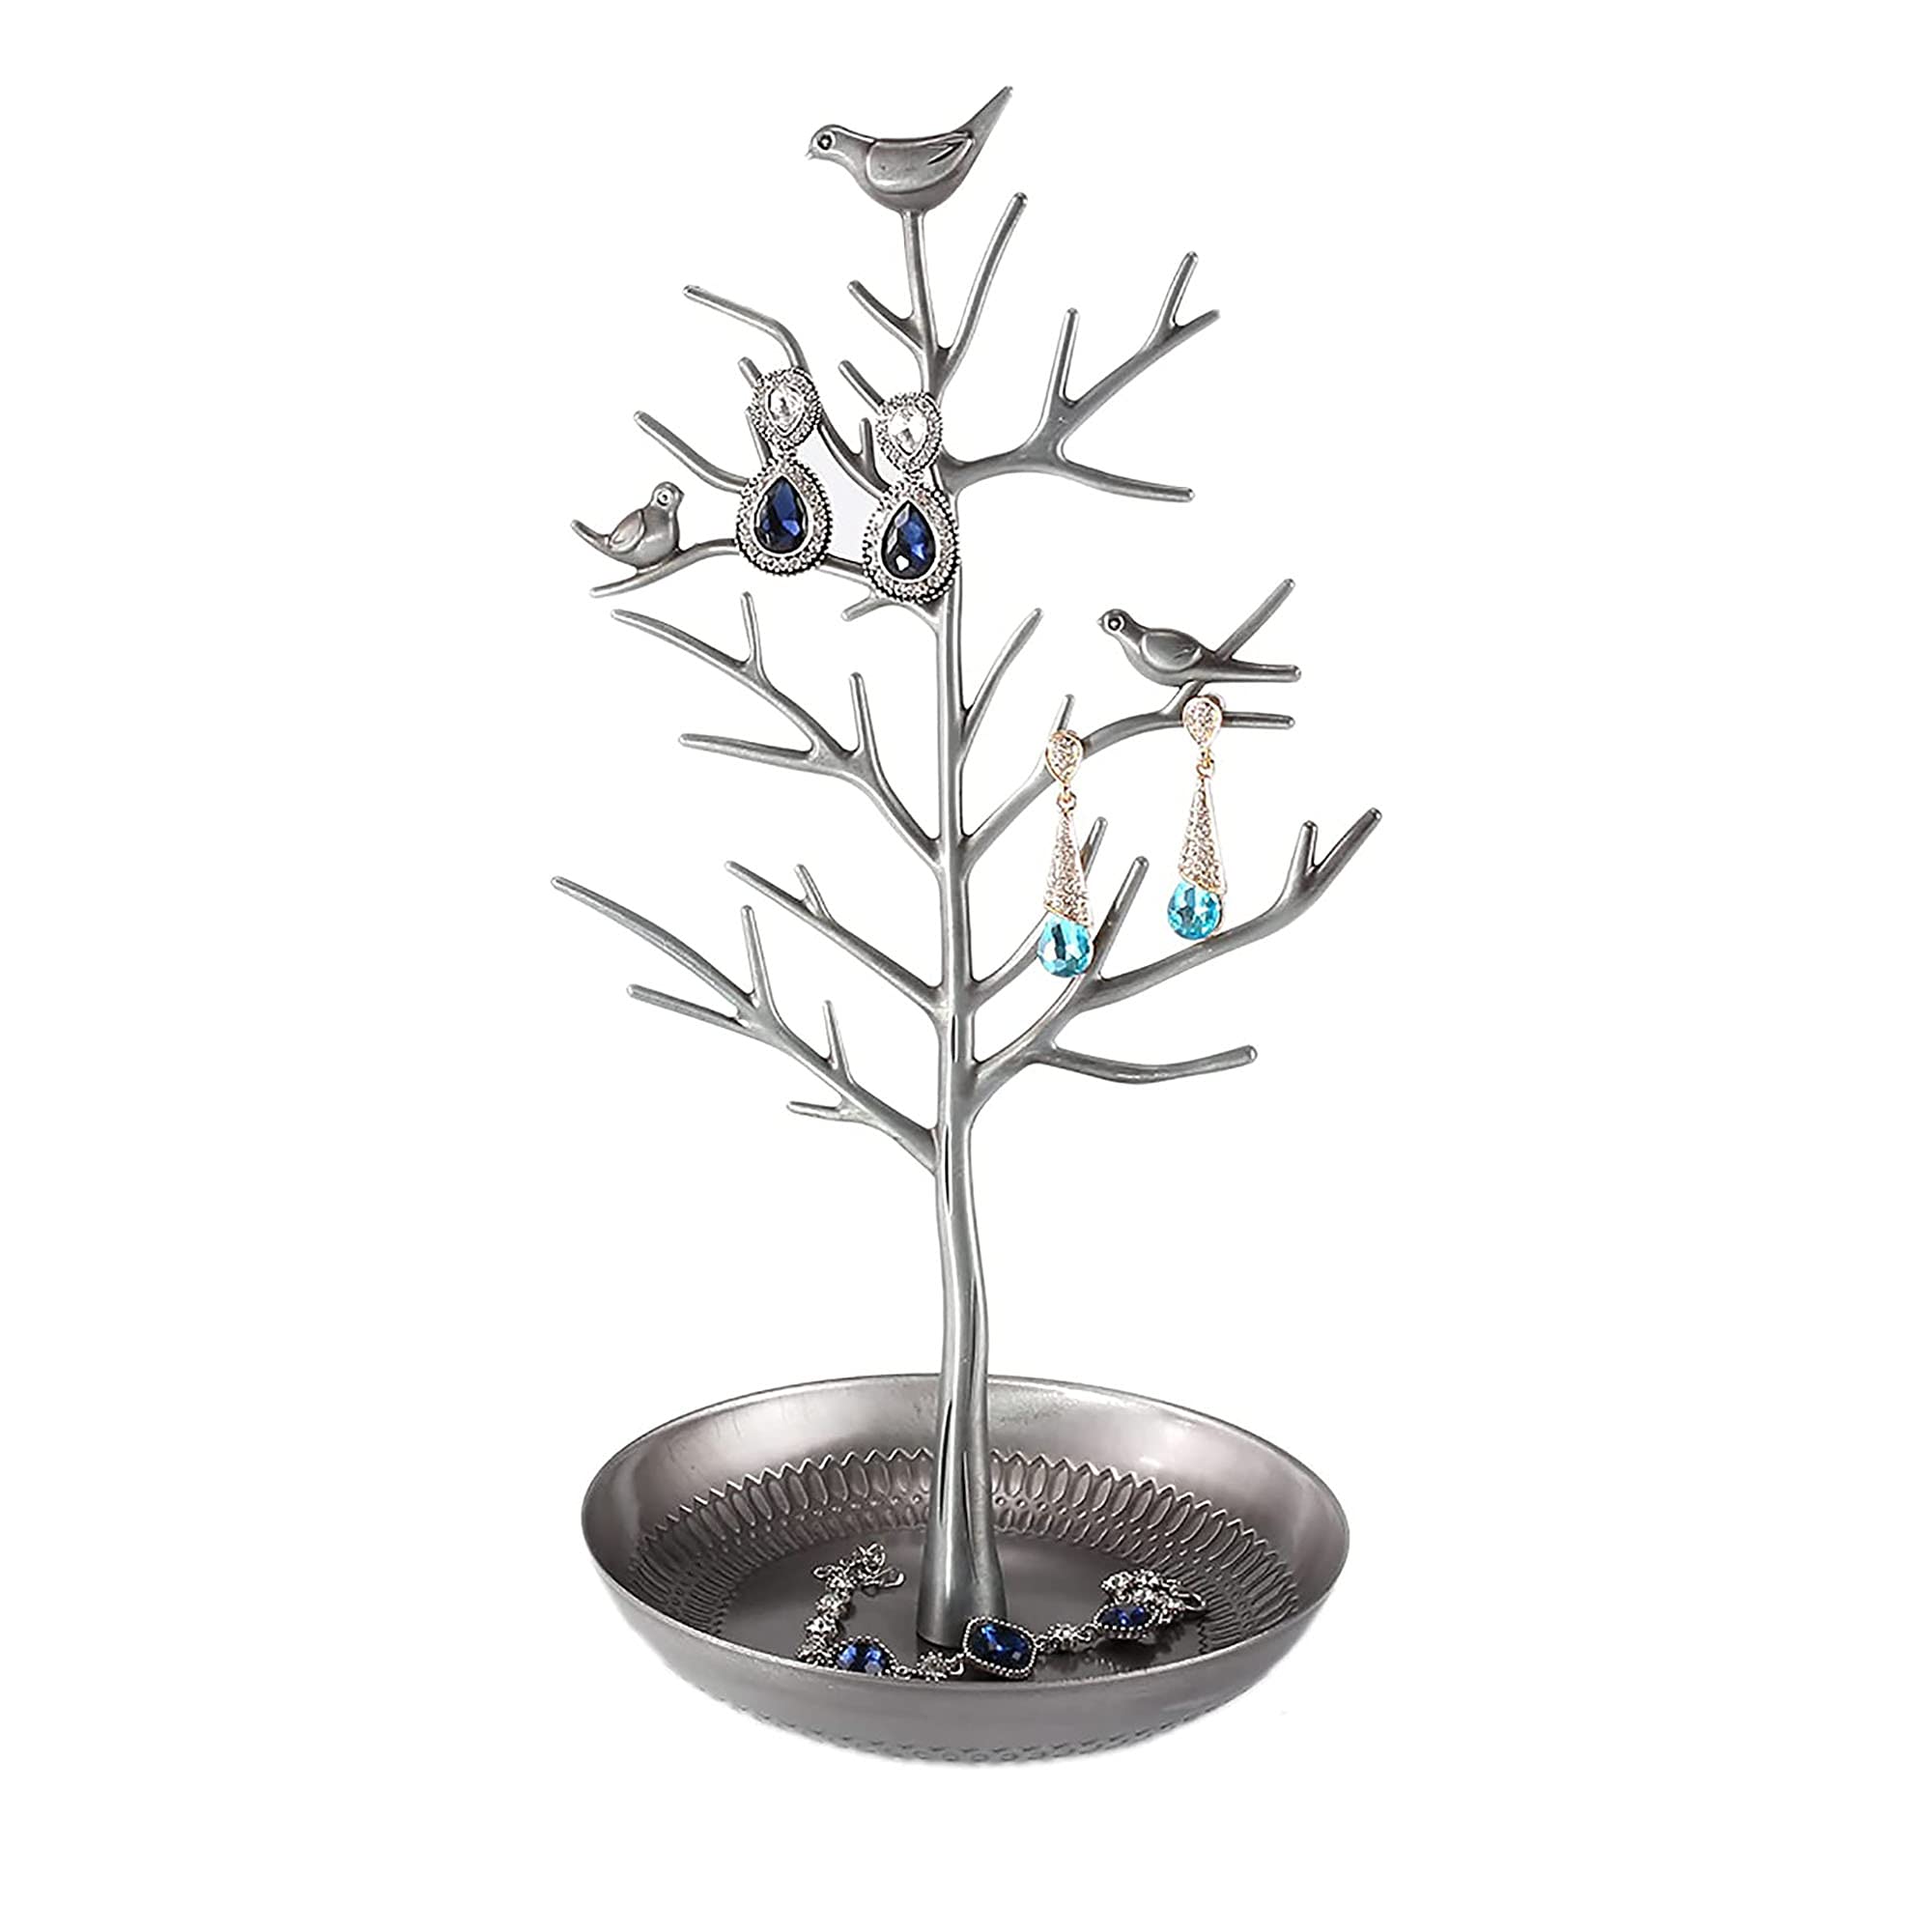 Homeanda Jewellery Stand,Earring Holder Ring Display Birds Tree Necklace Organizer (Silver)